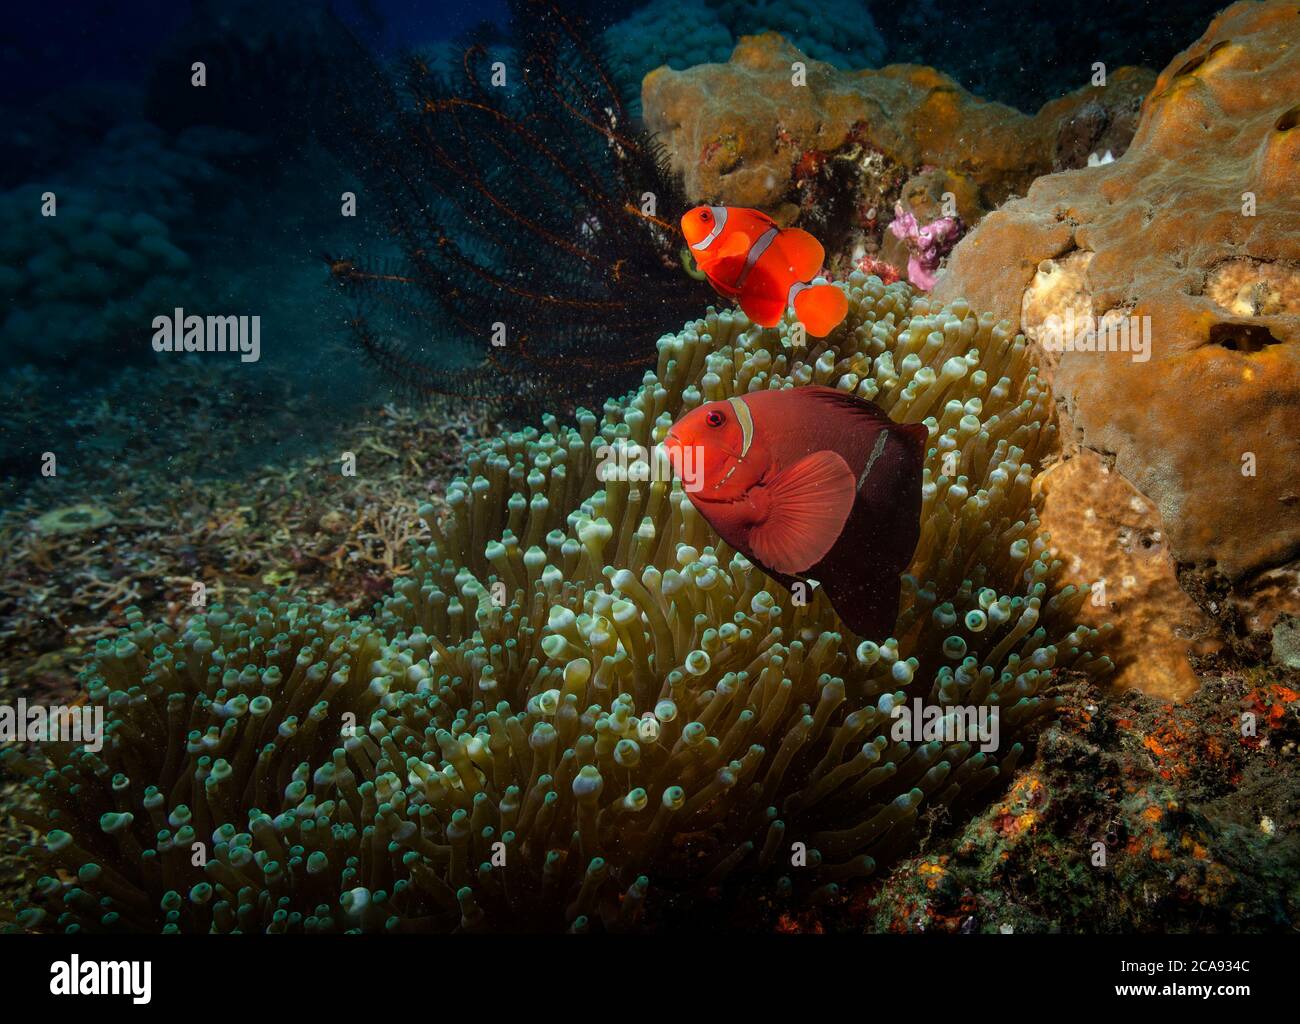 Spinecheek Anemonefish, Premnas biaculeatus, adult with young, sheltering in anemone, Tulamben, Bali Stock Photo